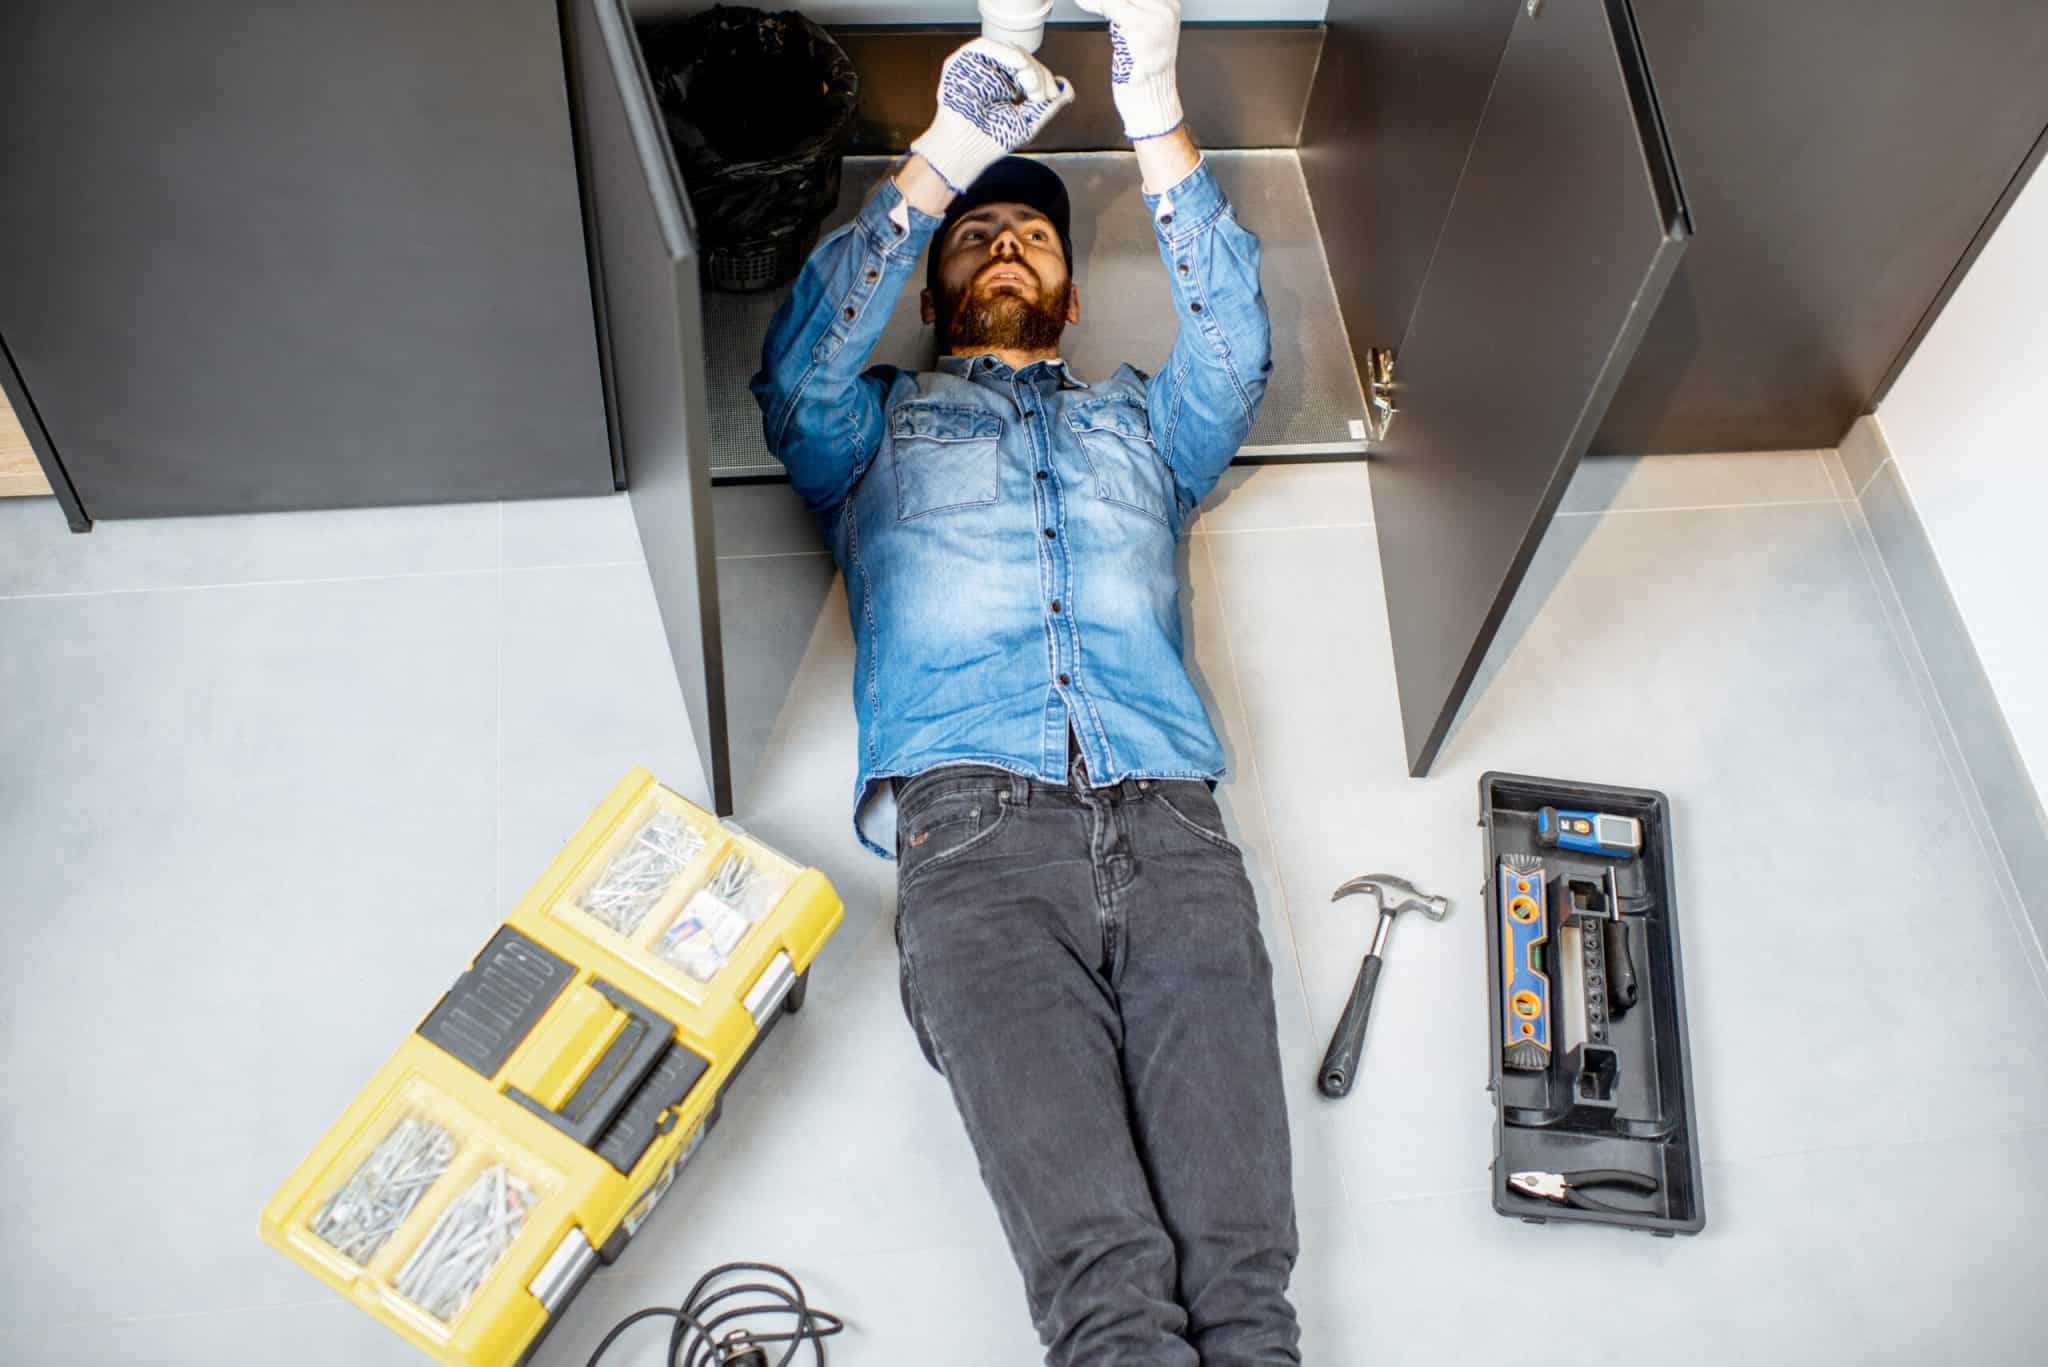 A man performing home plumbing repair while lying under the kitchen sink on the floor